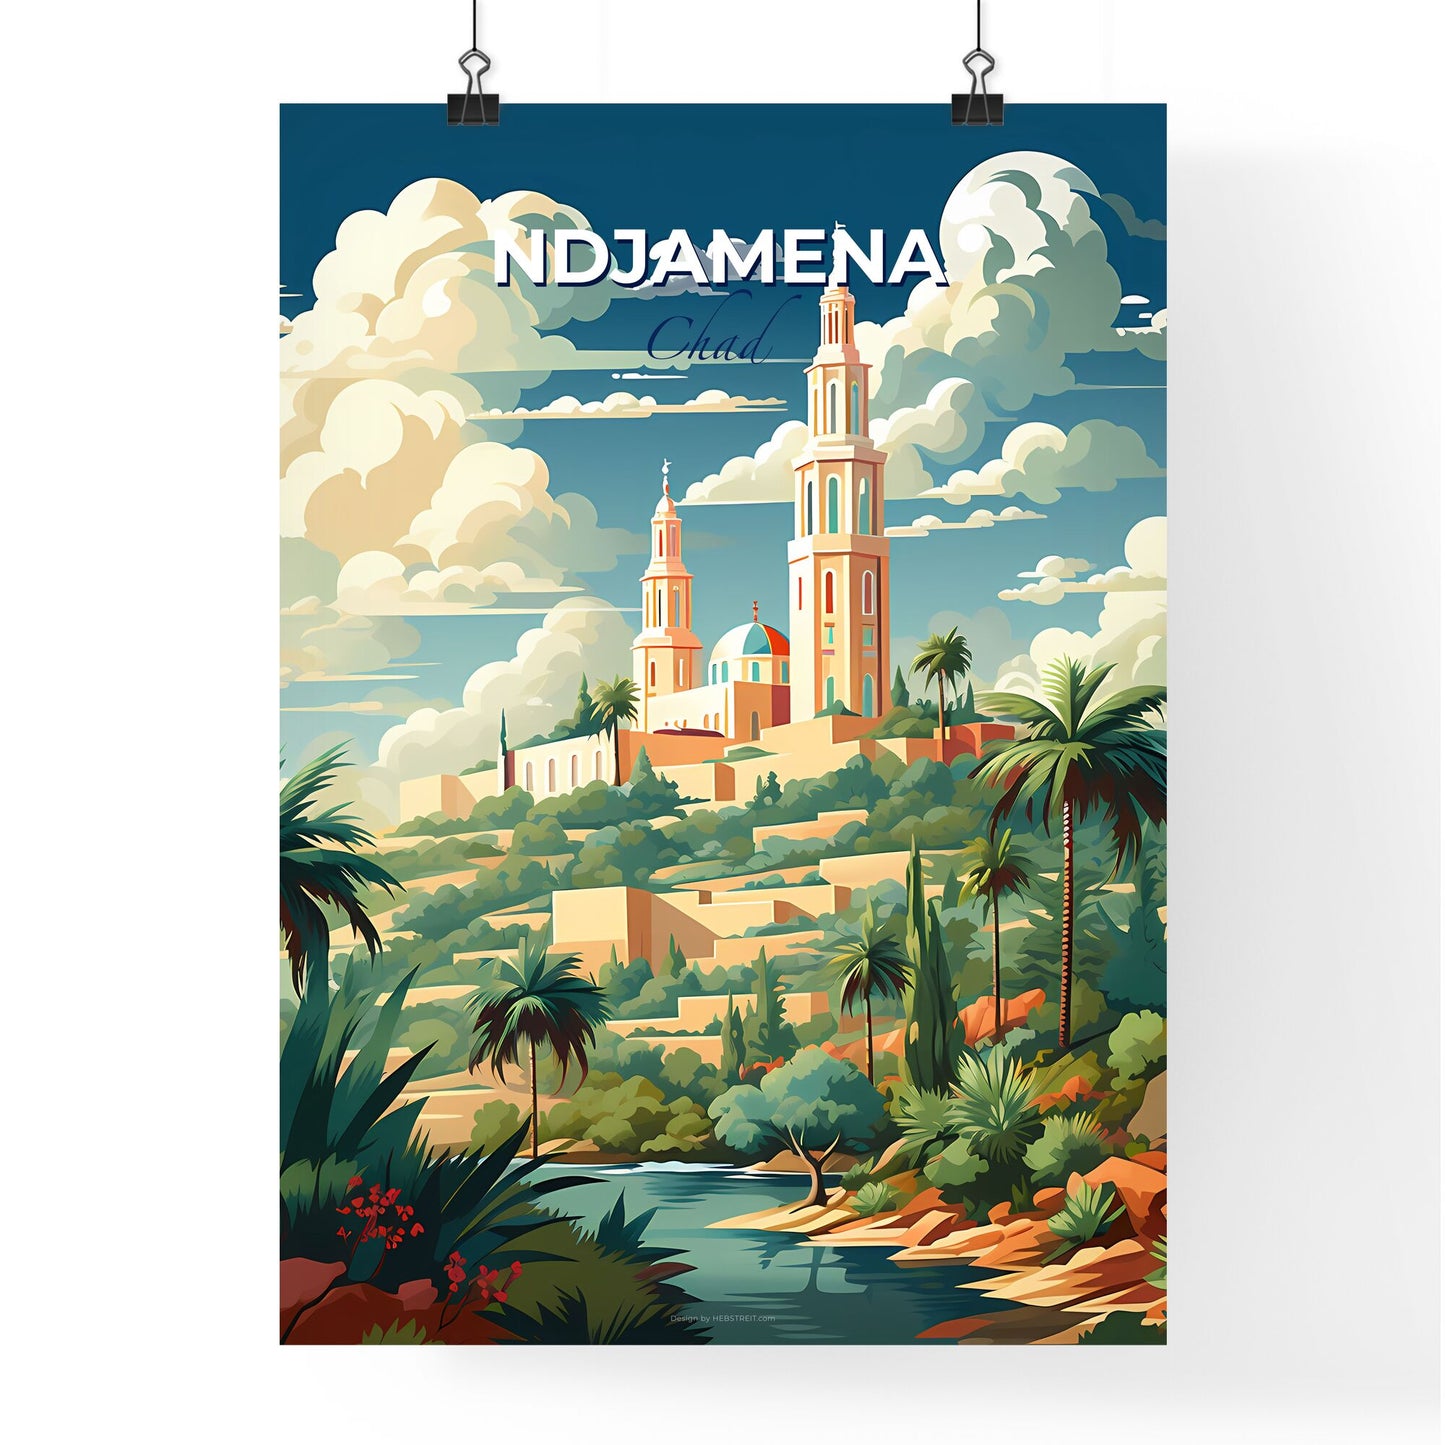 NDjamena Chad Skyline Painting - Vibrant Art Depicting a Castle on a Hill with Palm Trees and a River Default Title